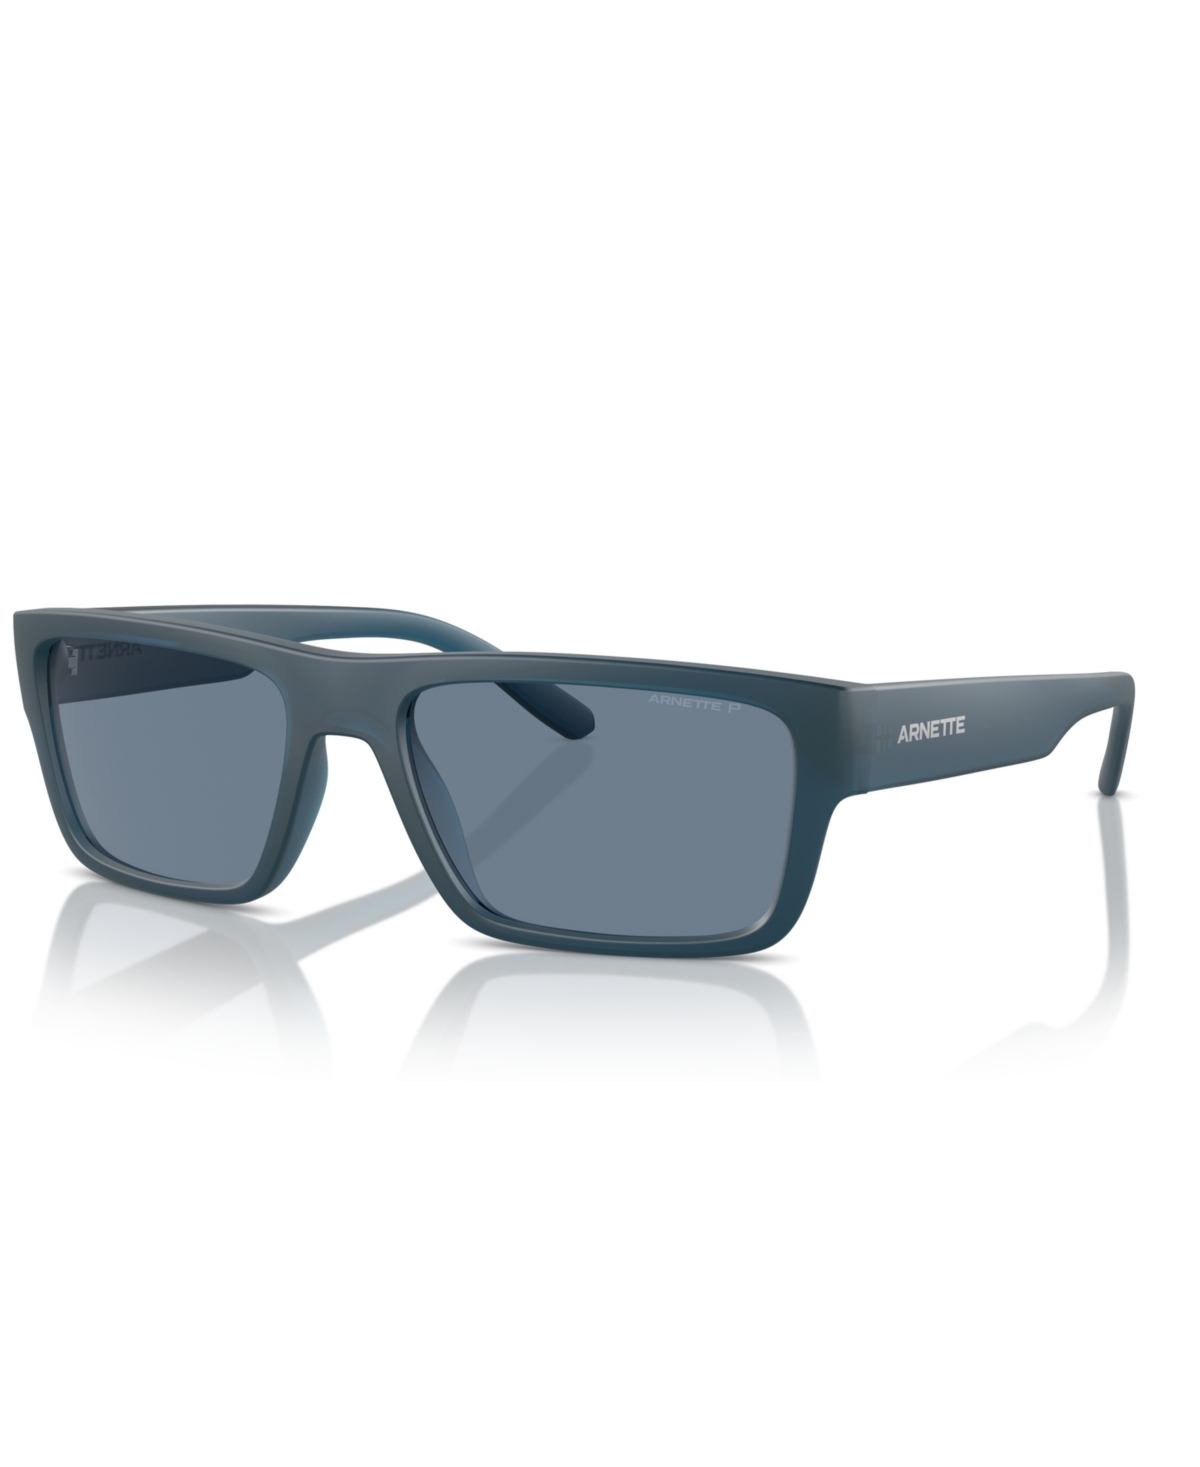 Men's Polarized Sunglasses, Phoxer An4338 - Frosted Blue